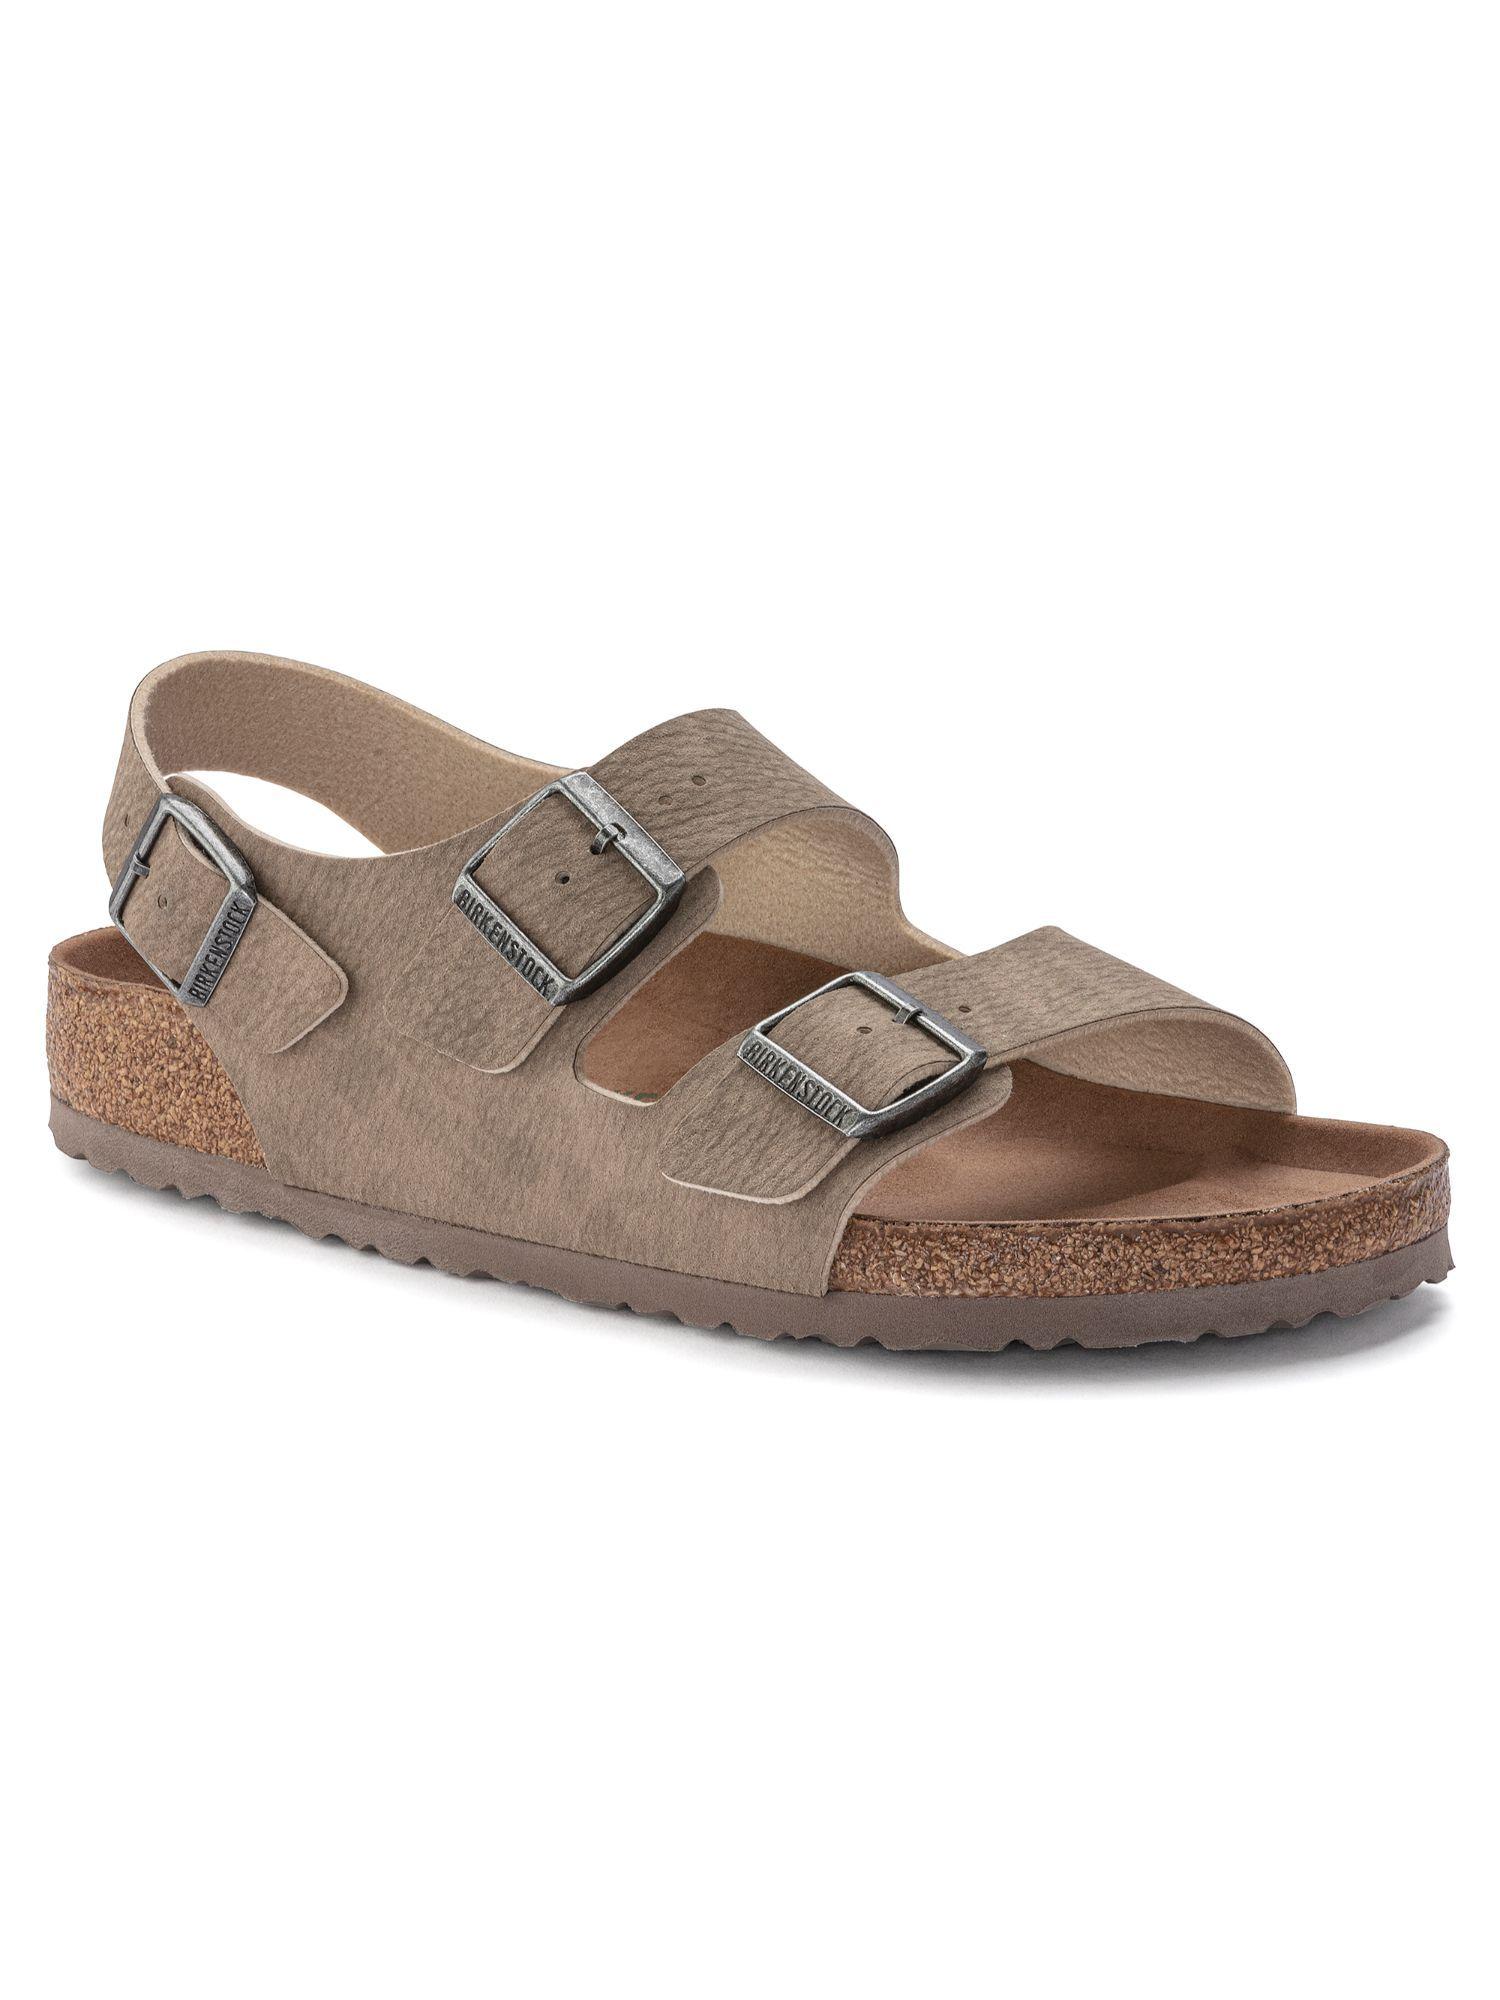 milano-vegan-desert-dust-gray-taupe-regular-width-sandals-with-an-ankle-strap